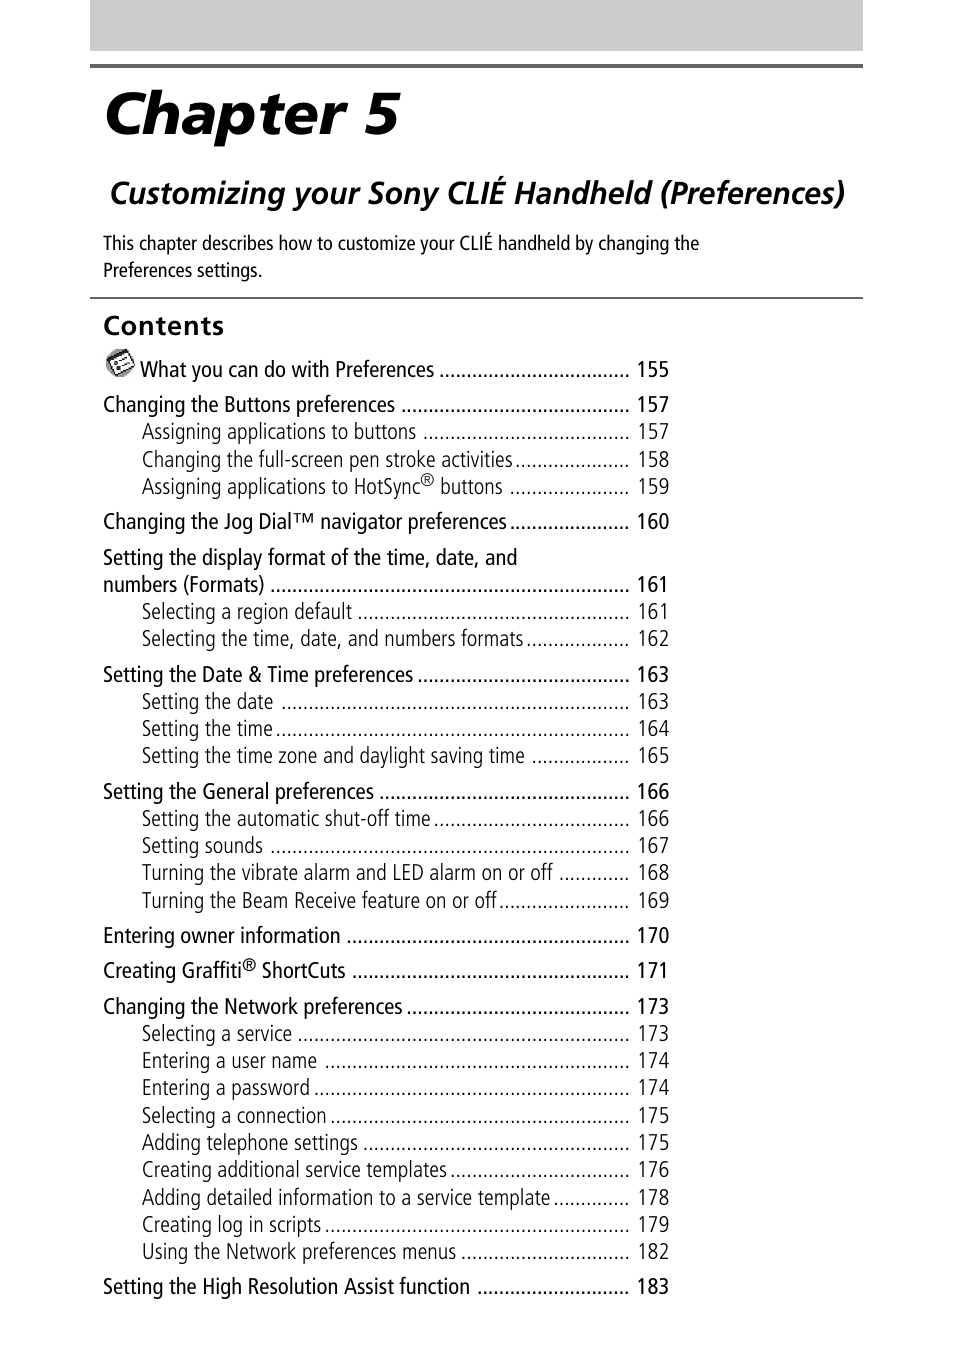 Chapter 5, Customizing your sony clié handheld (preferences) | Sony PEG-T415G User Manual | Page 154 / 220